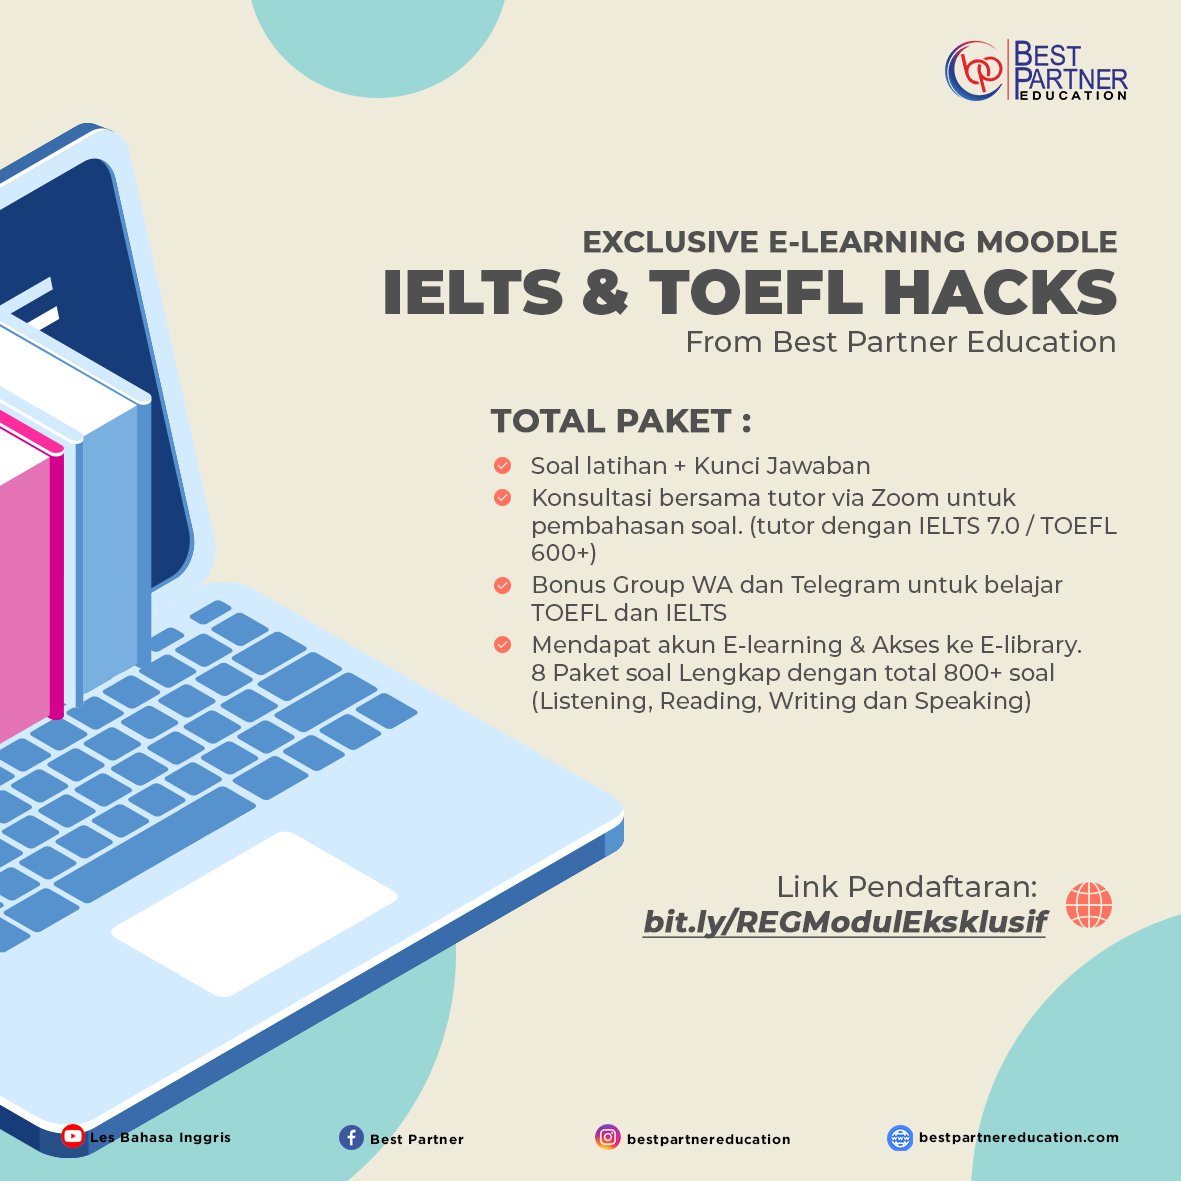 IELTS & TOEFL Tool Hack, Exlusive Moodle Learning Tool From Best Partner Education